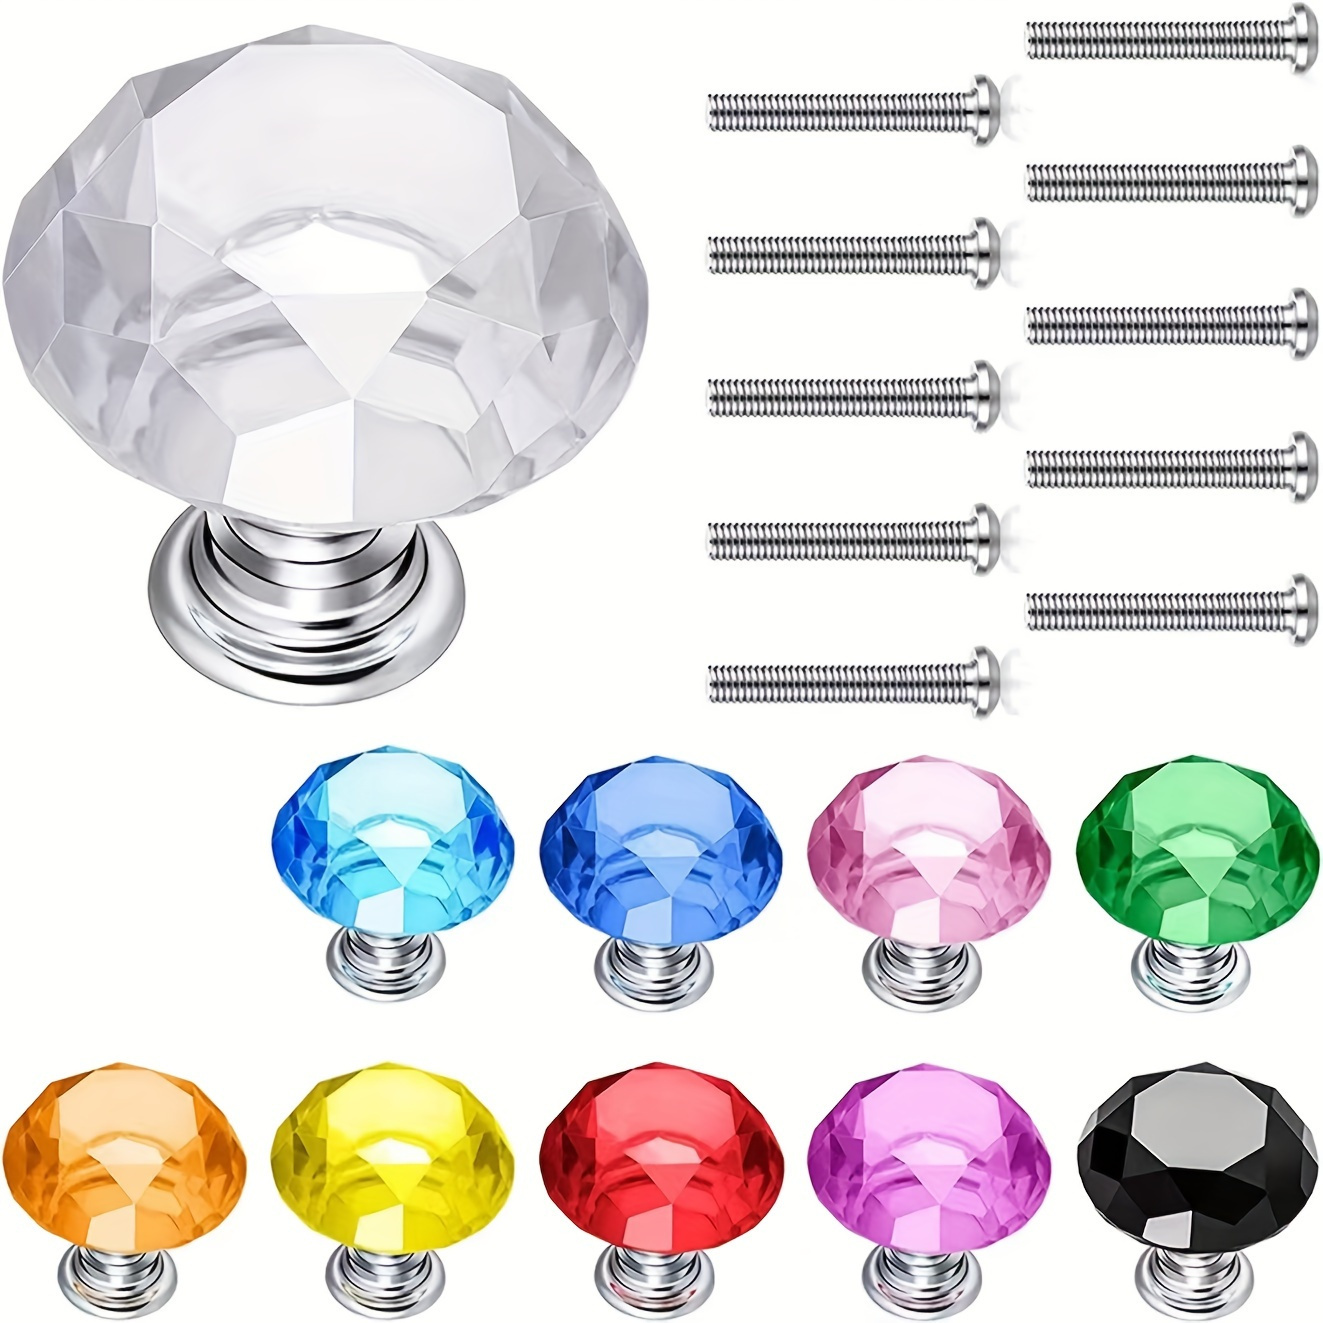 

10pcs Multi-colored Crystal Glass Cabinet Knobs, Decorative Drawer Pulls And Handles For Dresser, Kitchen, Wardrobe, Cupboard With 25mm And 30mm Screws Included